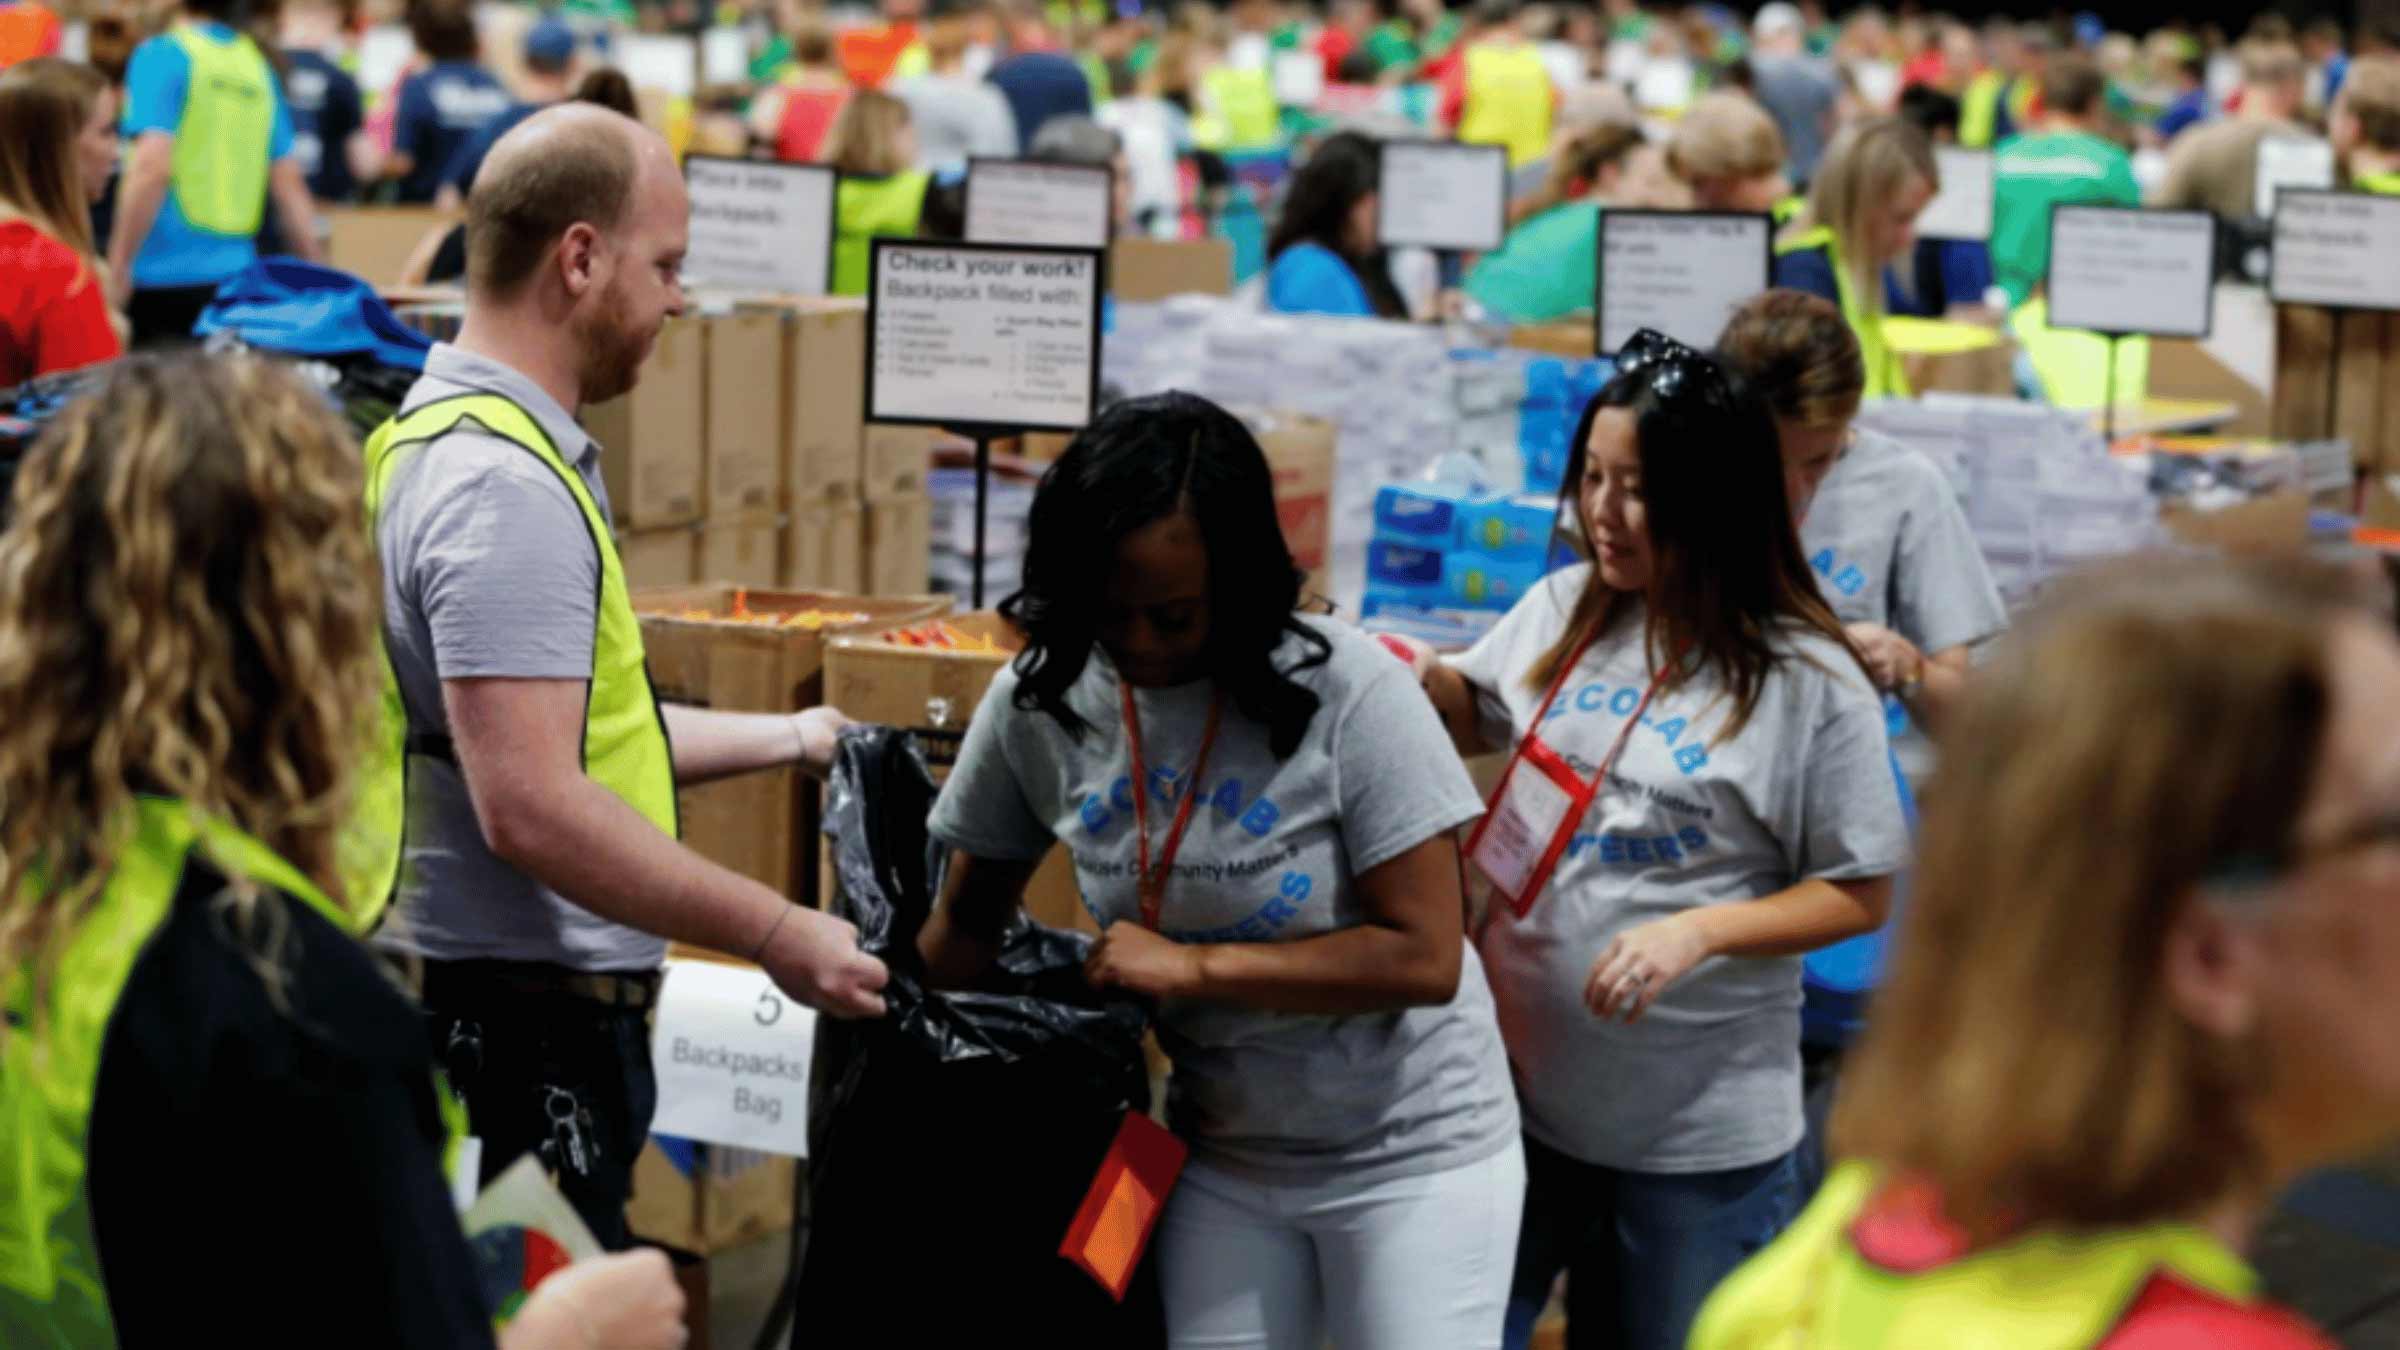 A volunteer is packing a backpack surrounded by other volunteers